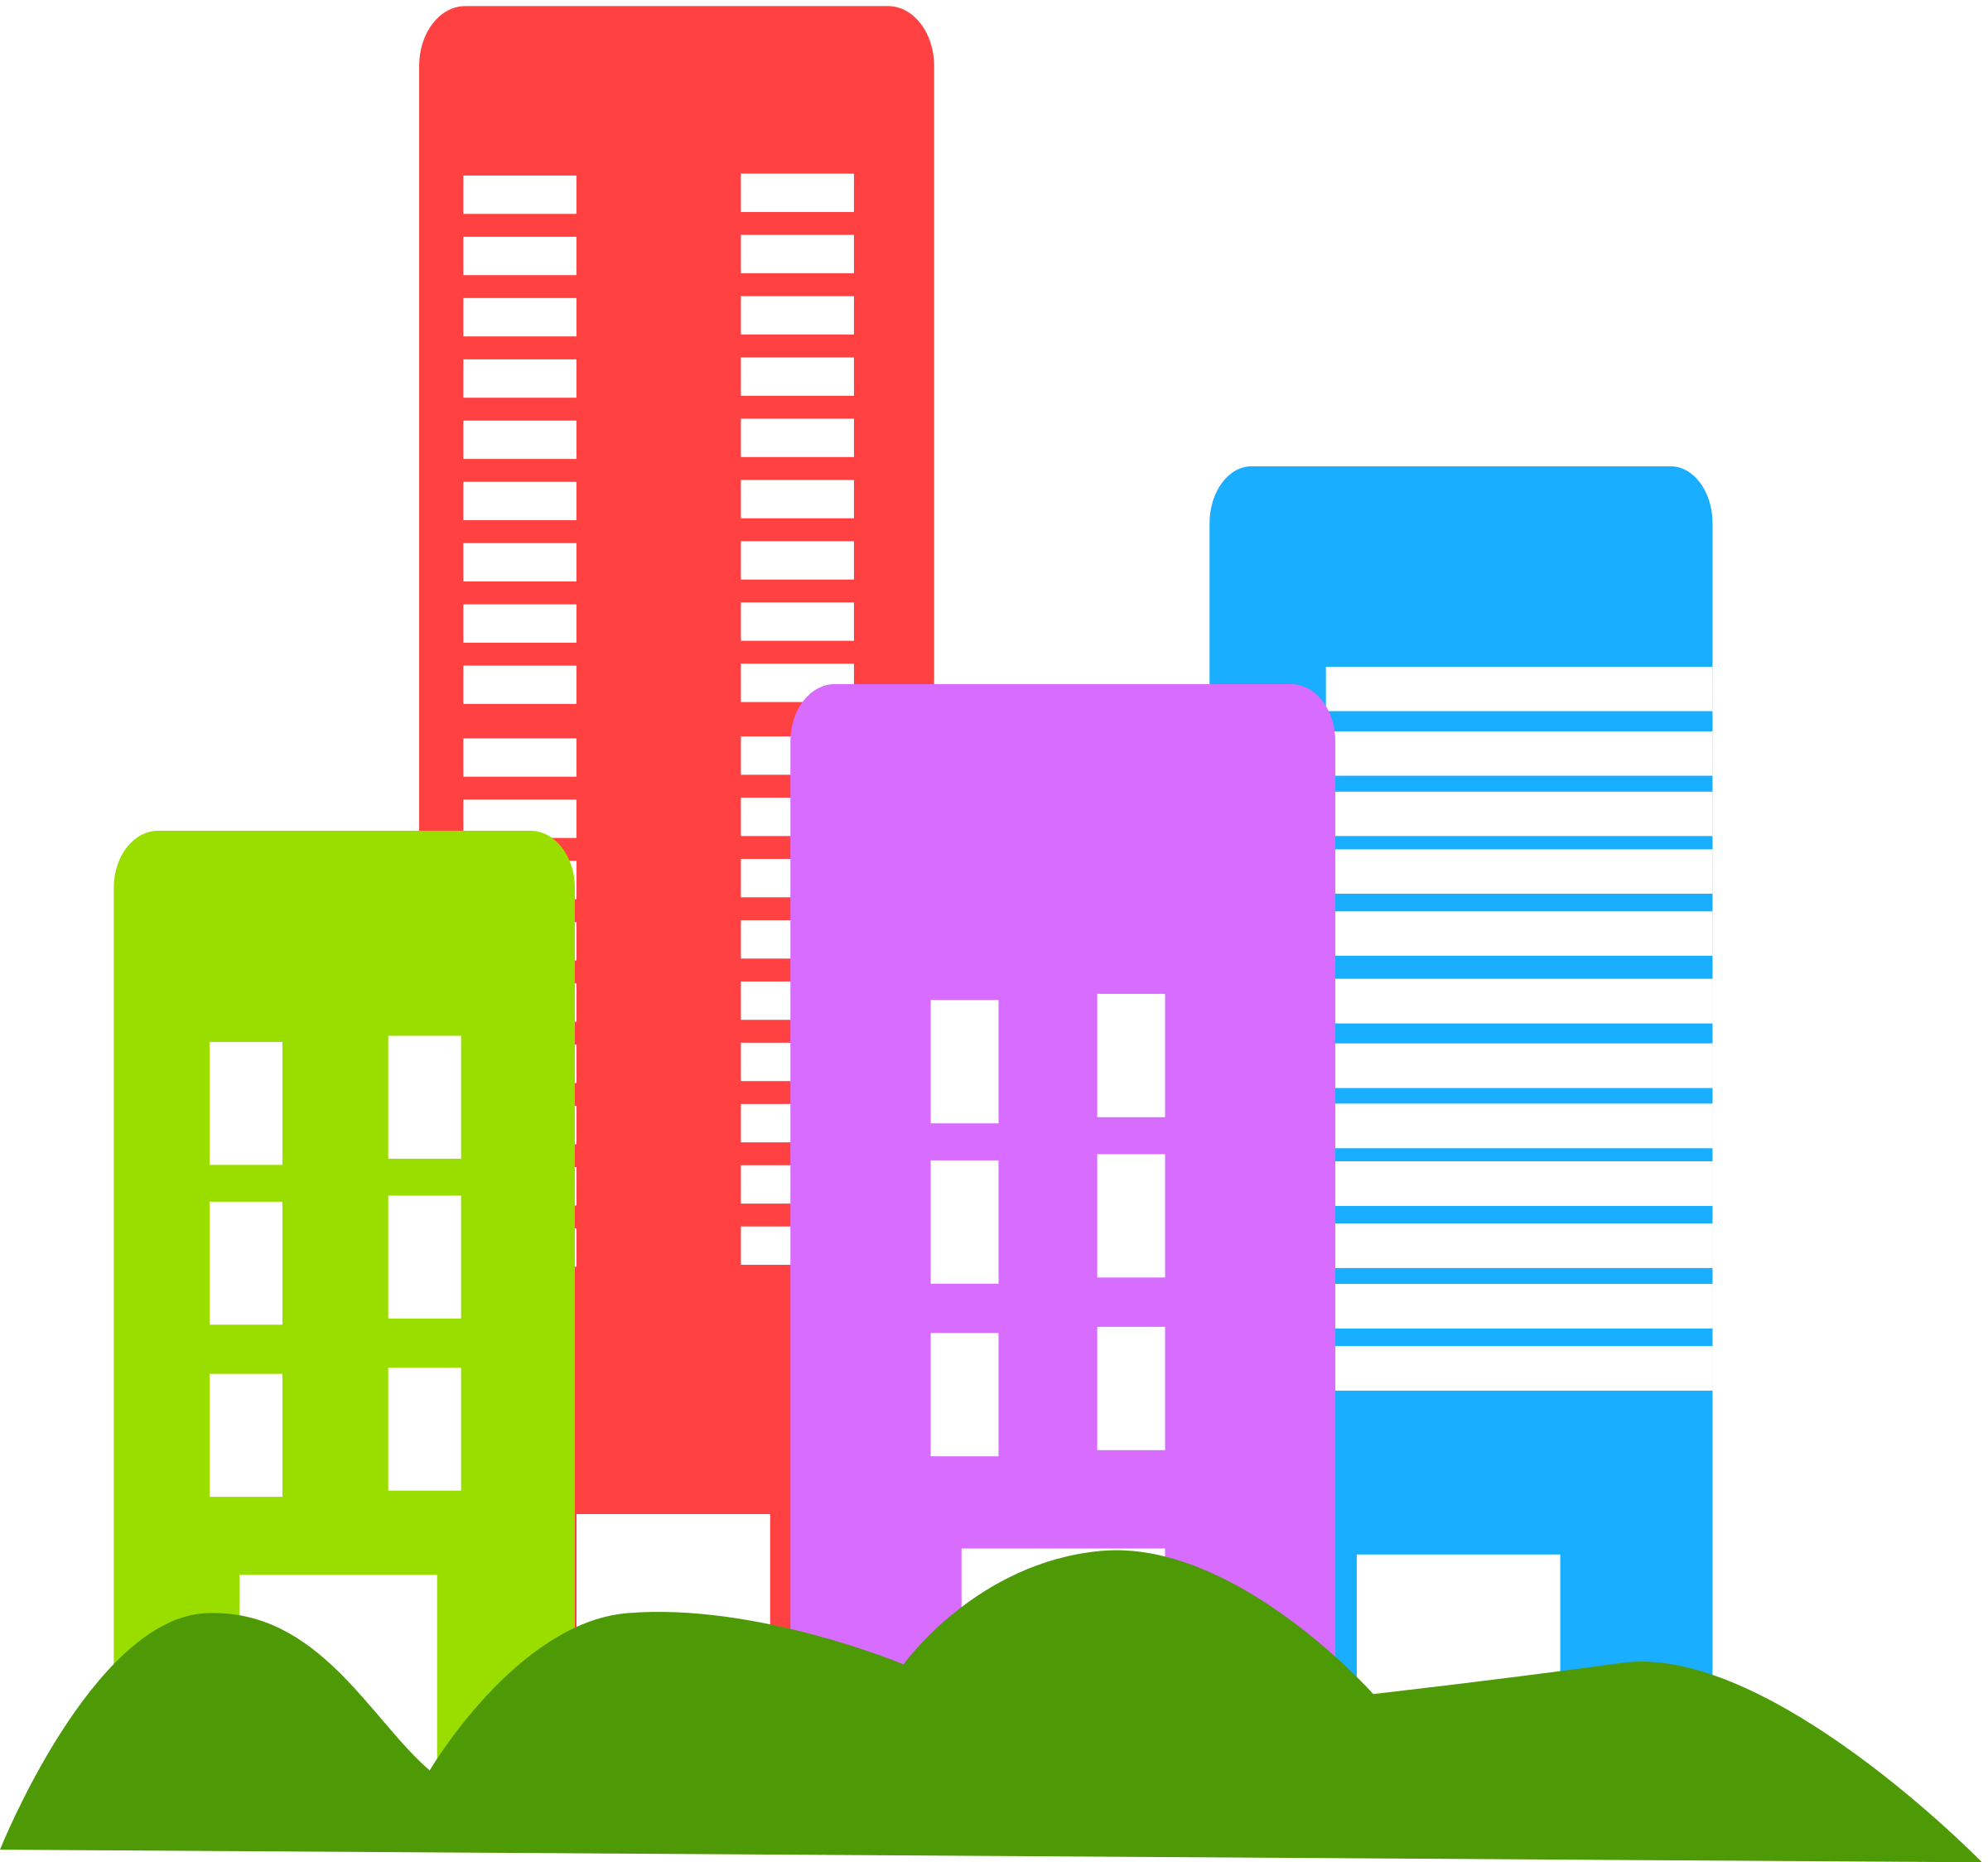 Fresh real estate cilpart. Buildings clipart